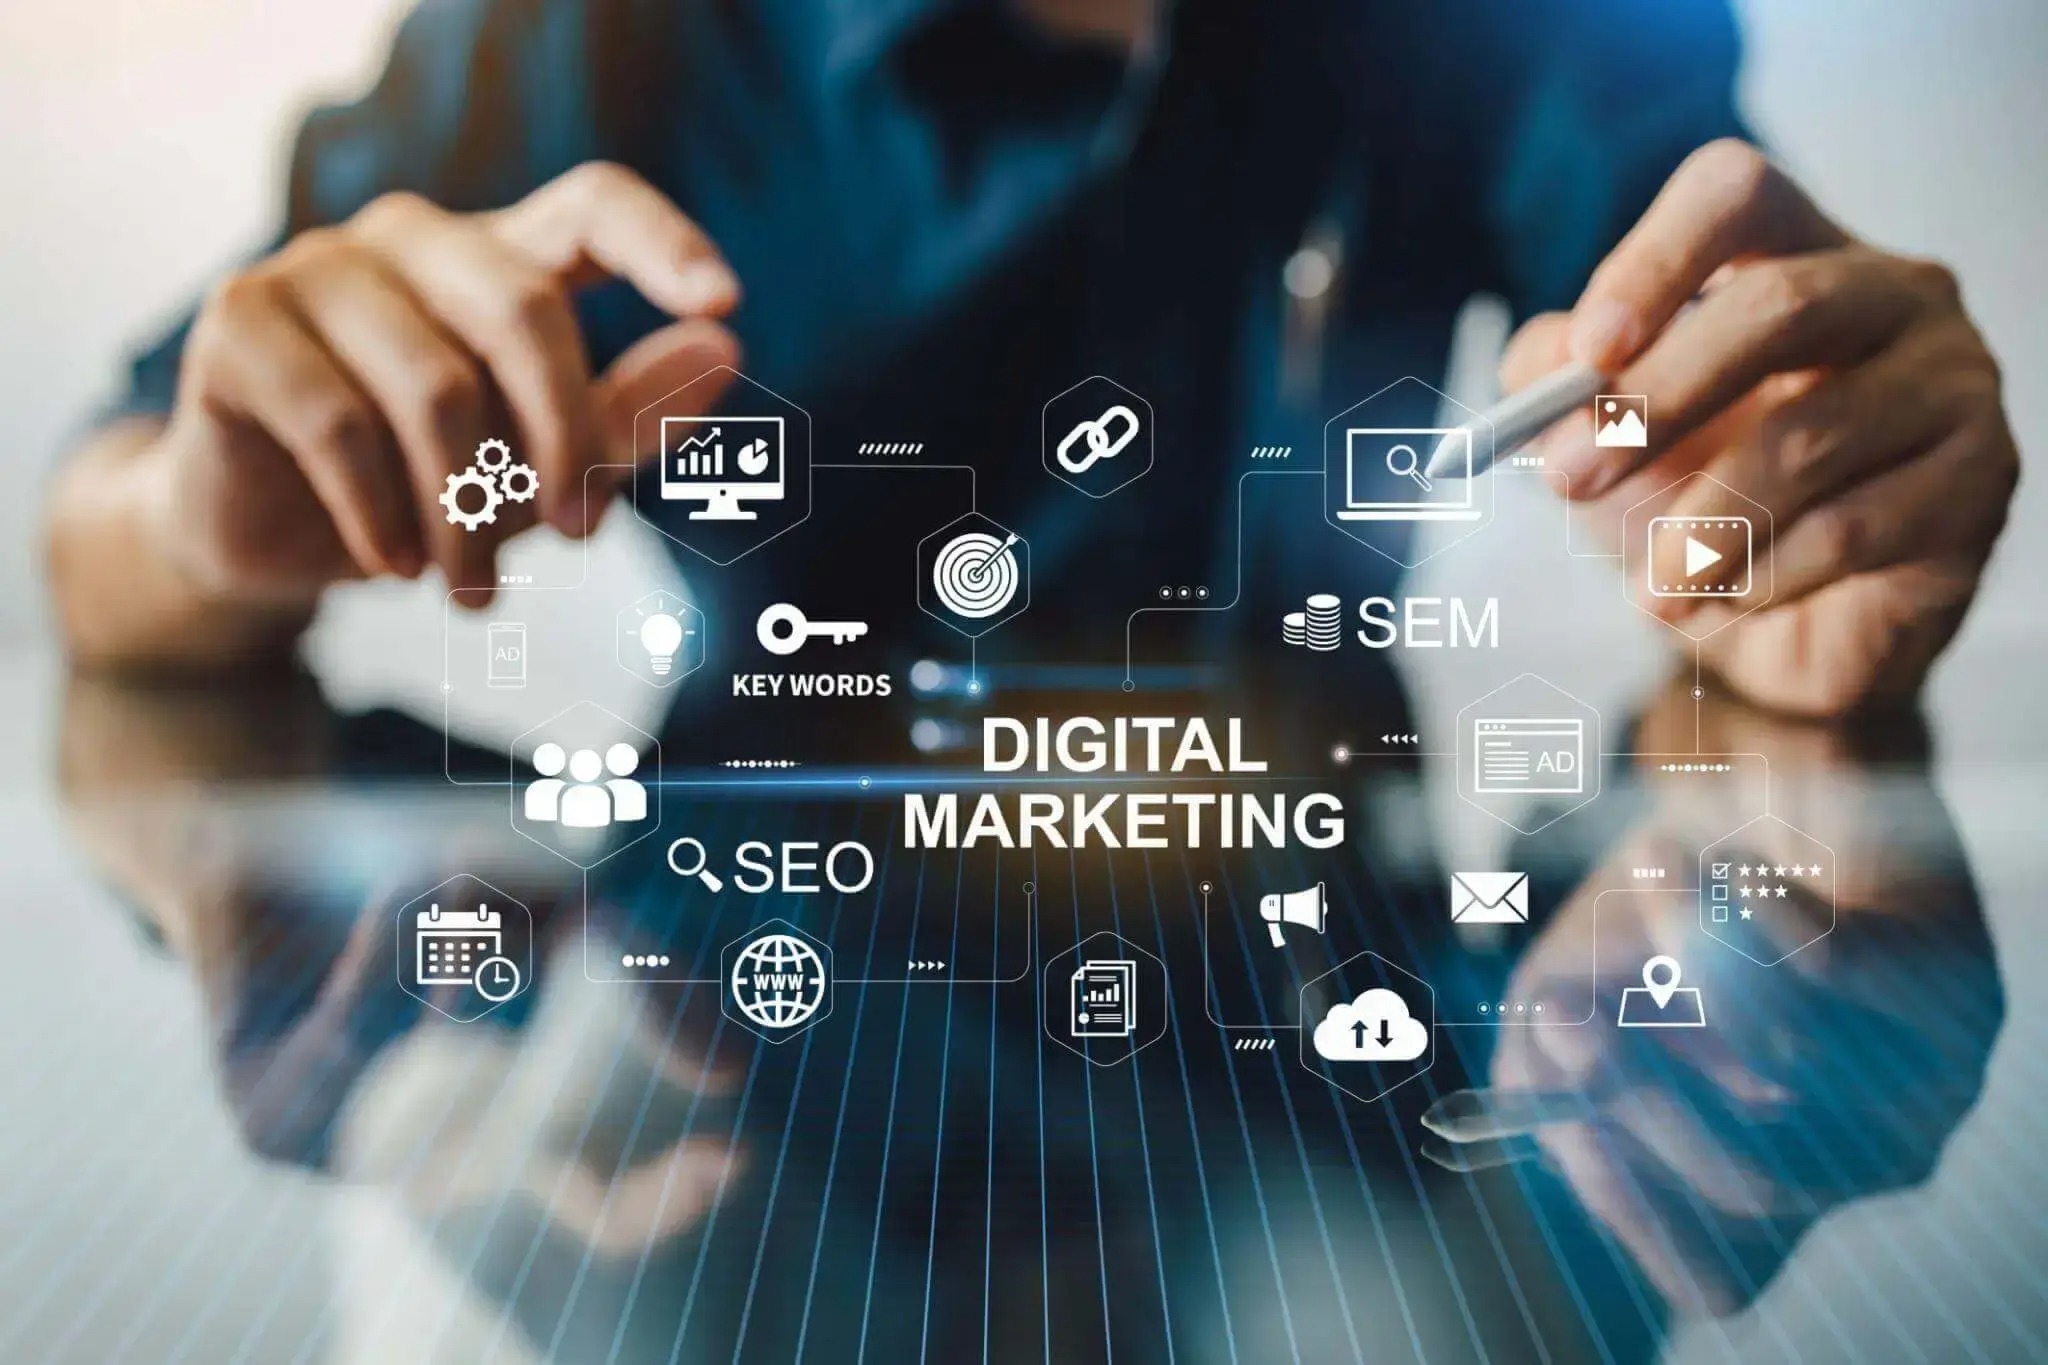 What Is Best For Online Money - Digital Marketing Or SEO?